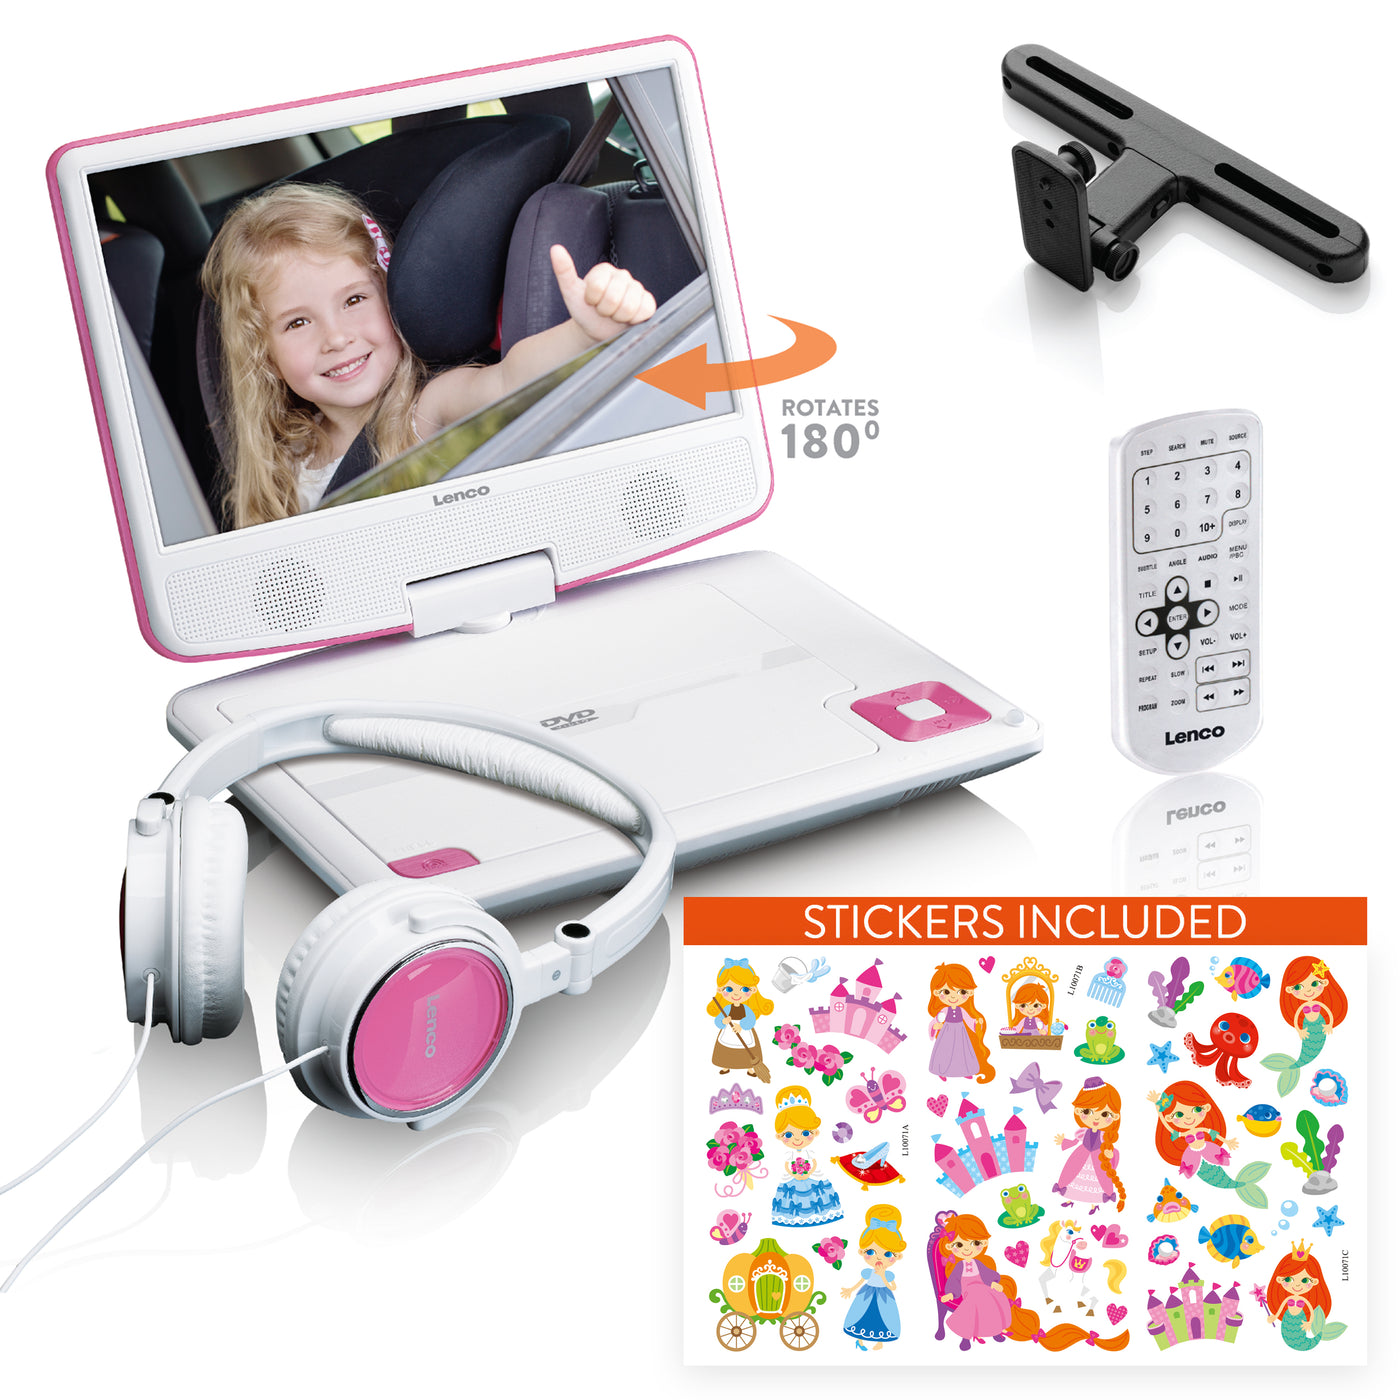 LENCO DVP-920PK - Portable 9" DVD player with USB headphones and mounting bracket - Pink/White